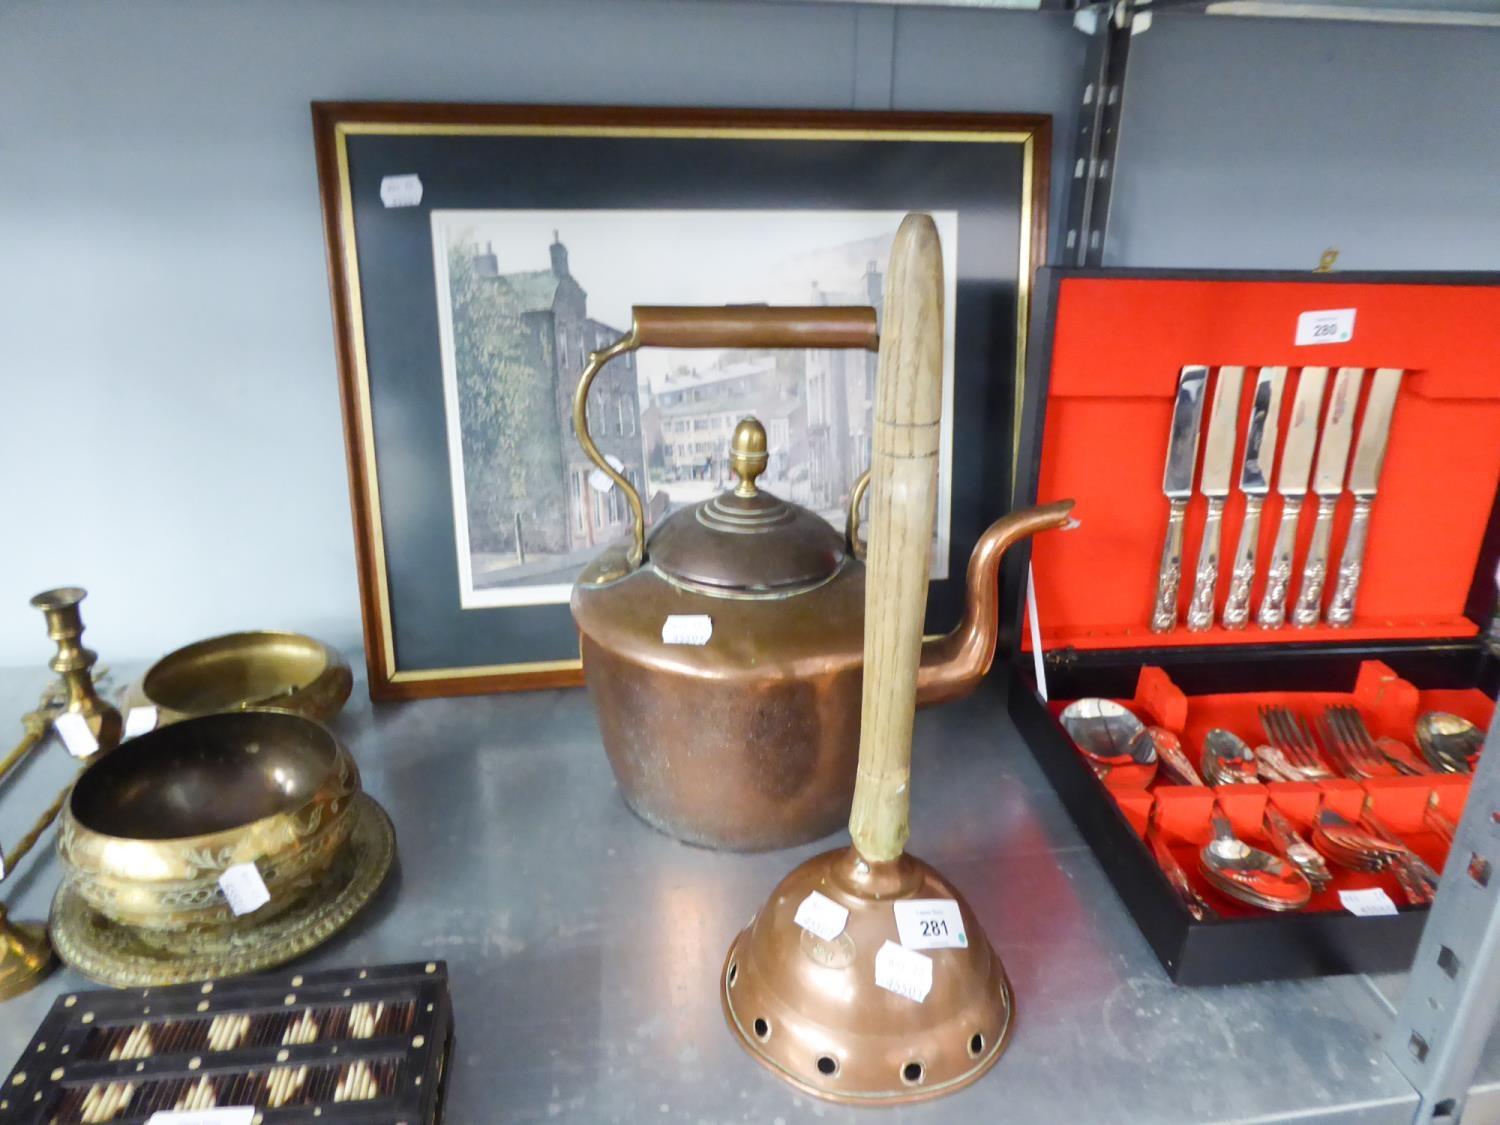 LARGE COPPER KETTLE, A WASHING POSSER COPPER WITH WOODEN HANDLE AND A WATERCOLOUR PRINT OF "DELPH"